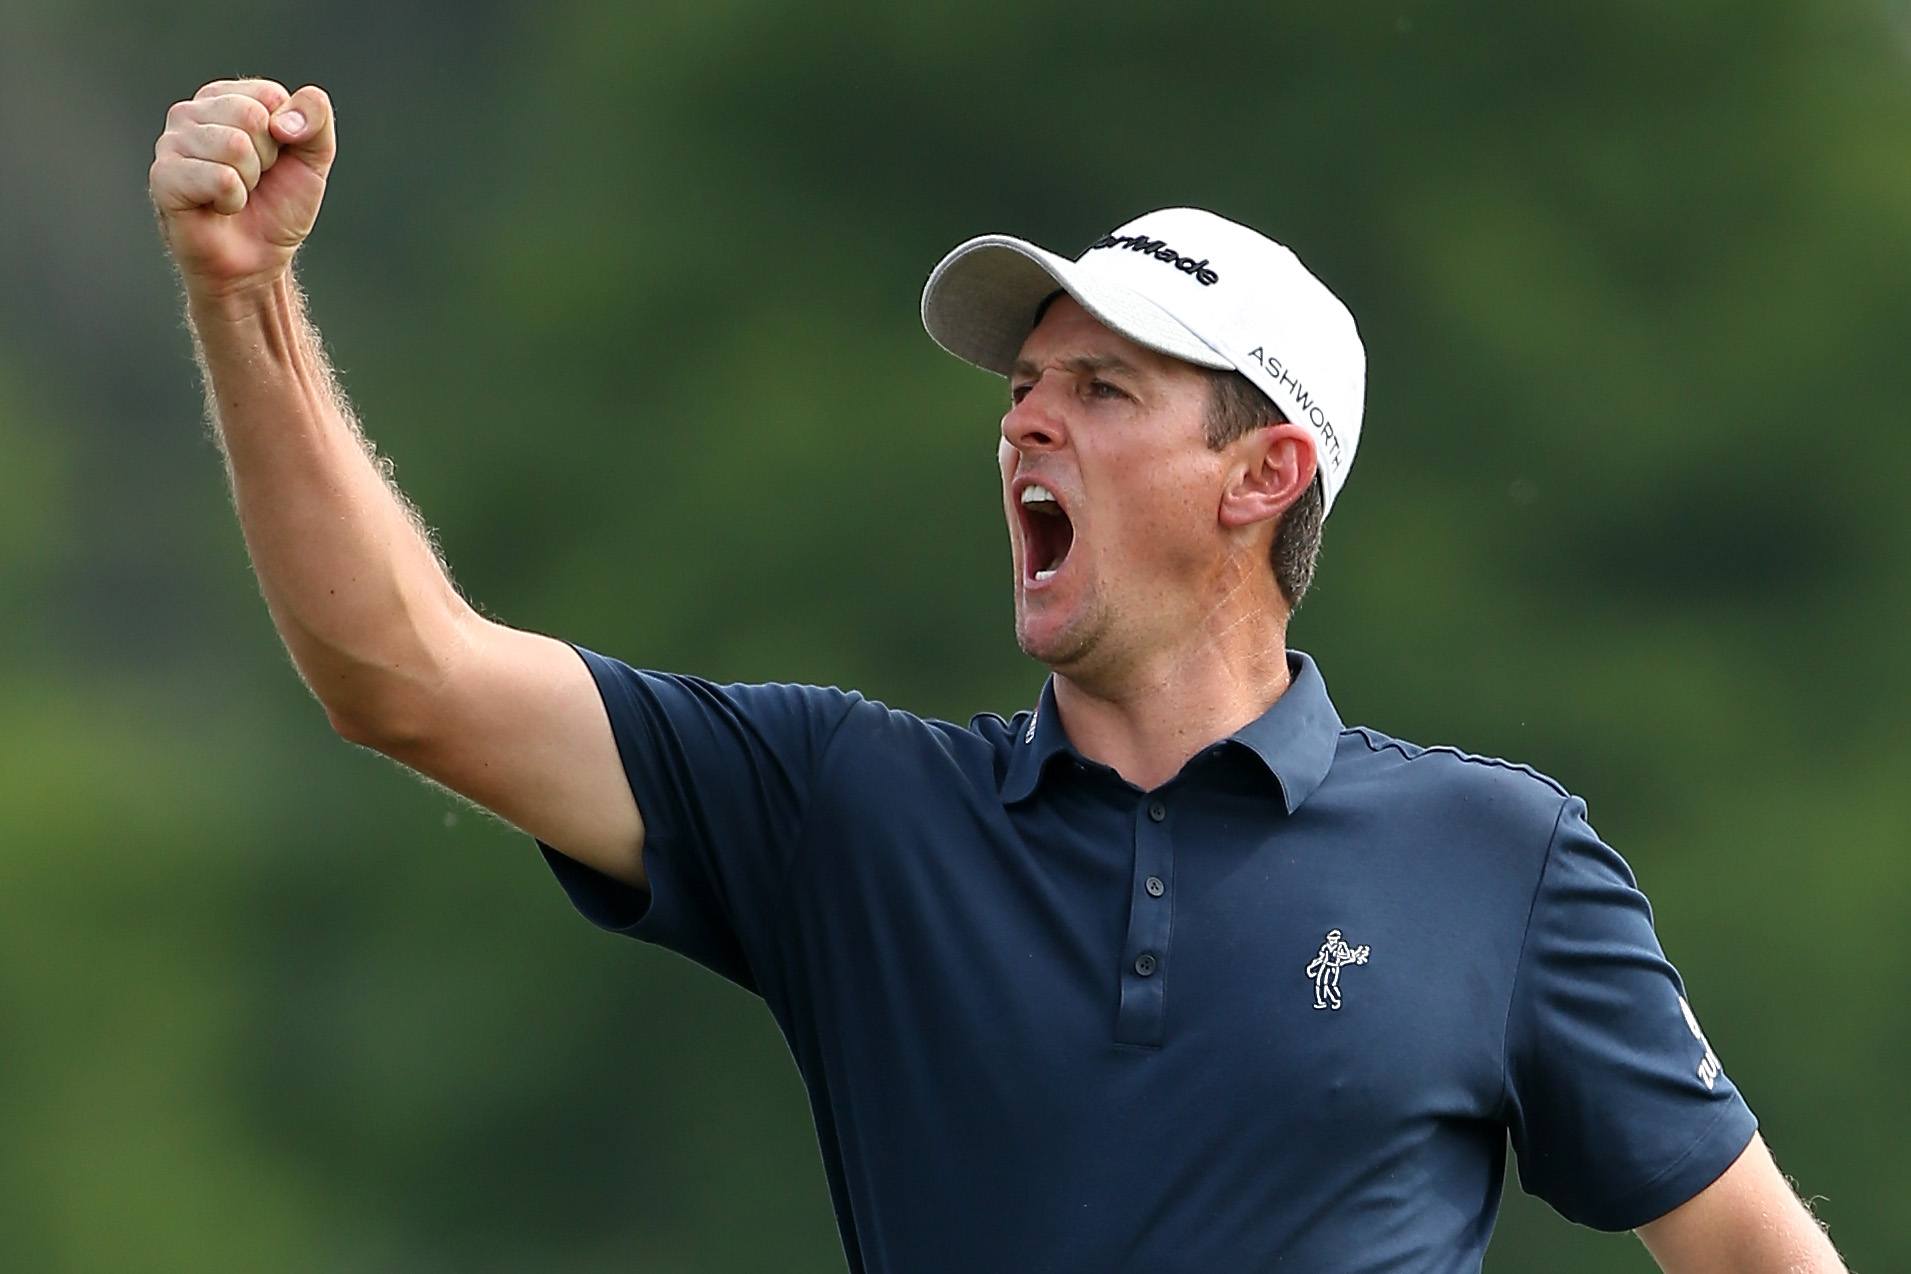 AVONDALE, LA - APRIL 26: Justin Rose of England reacts after putting in for a birdie on the 18th hole during the final round of the Zurich Classic of New Orleans at TPC Louisiana on April 26, 2015 in Avondale, Louisiana. (Photo by Chris Graythen/Getty Images)